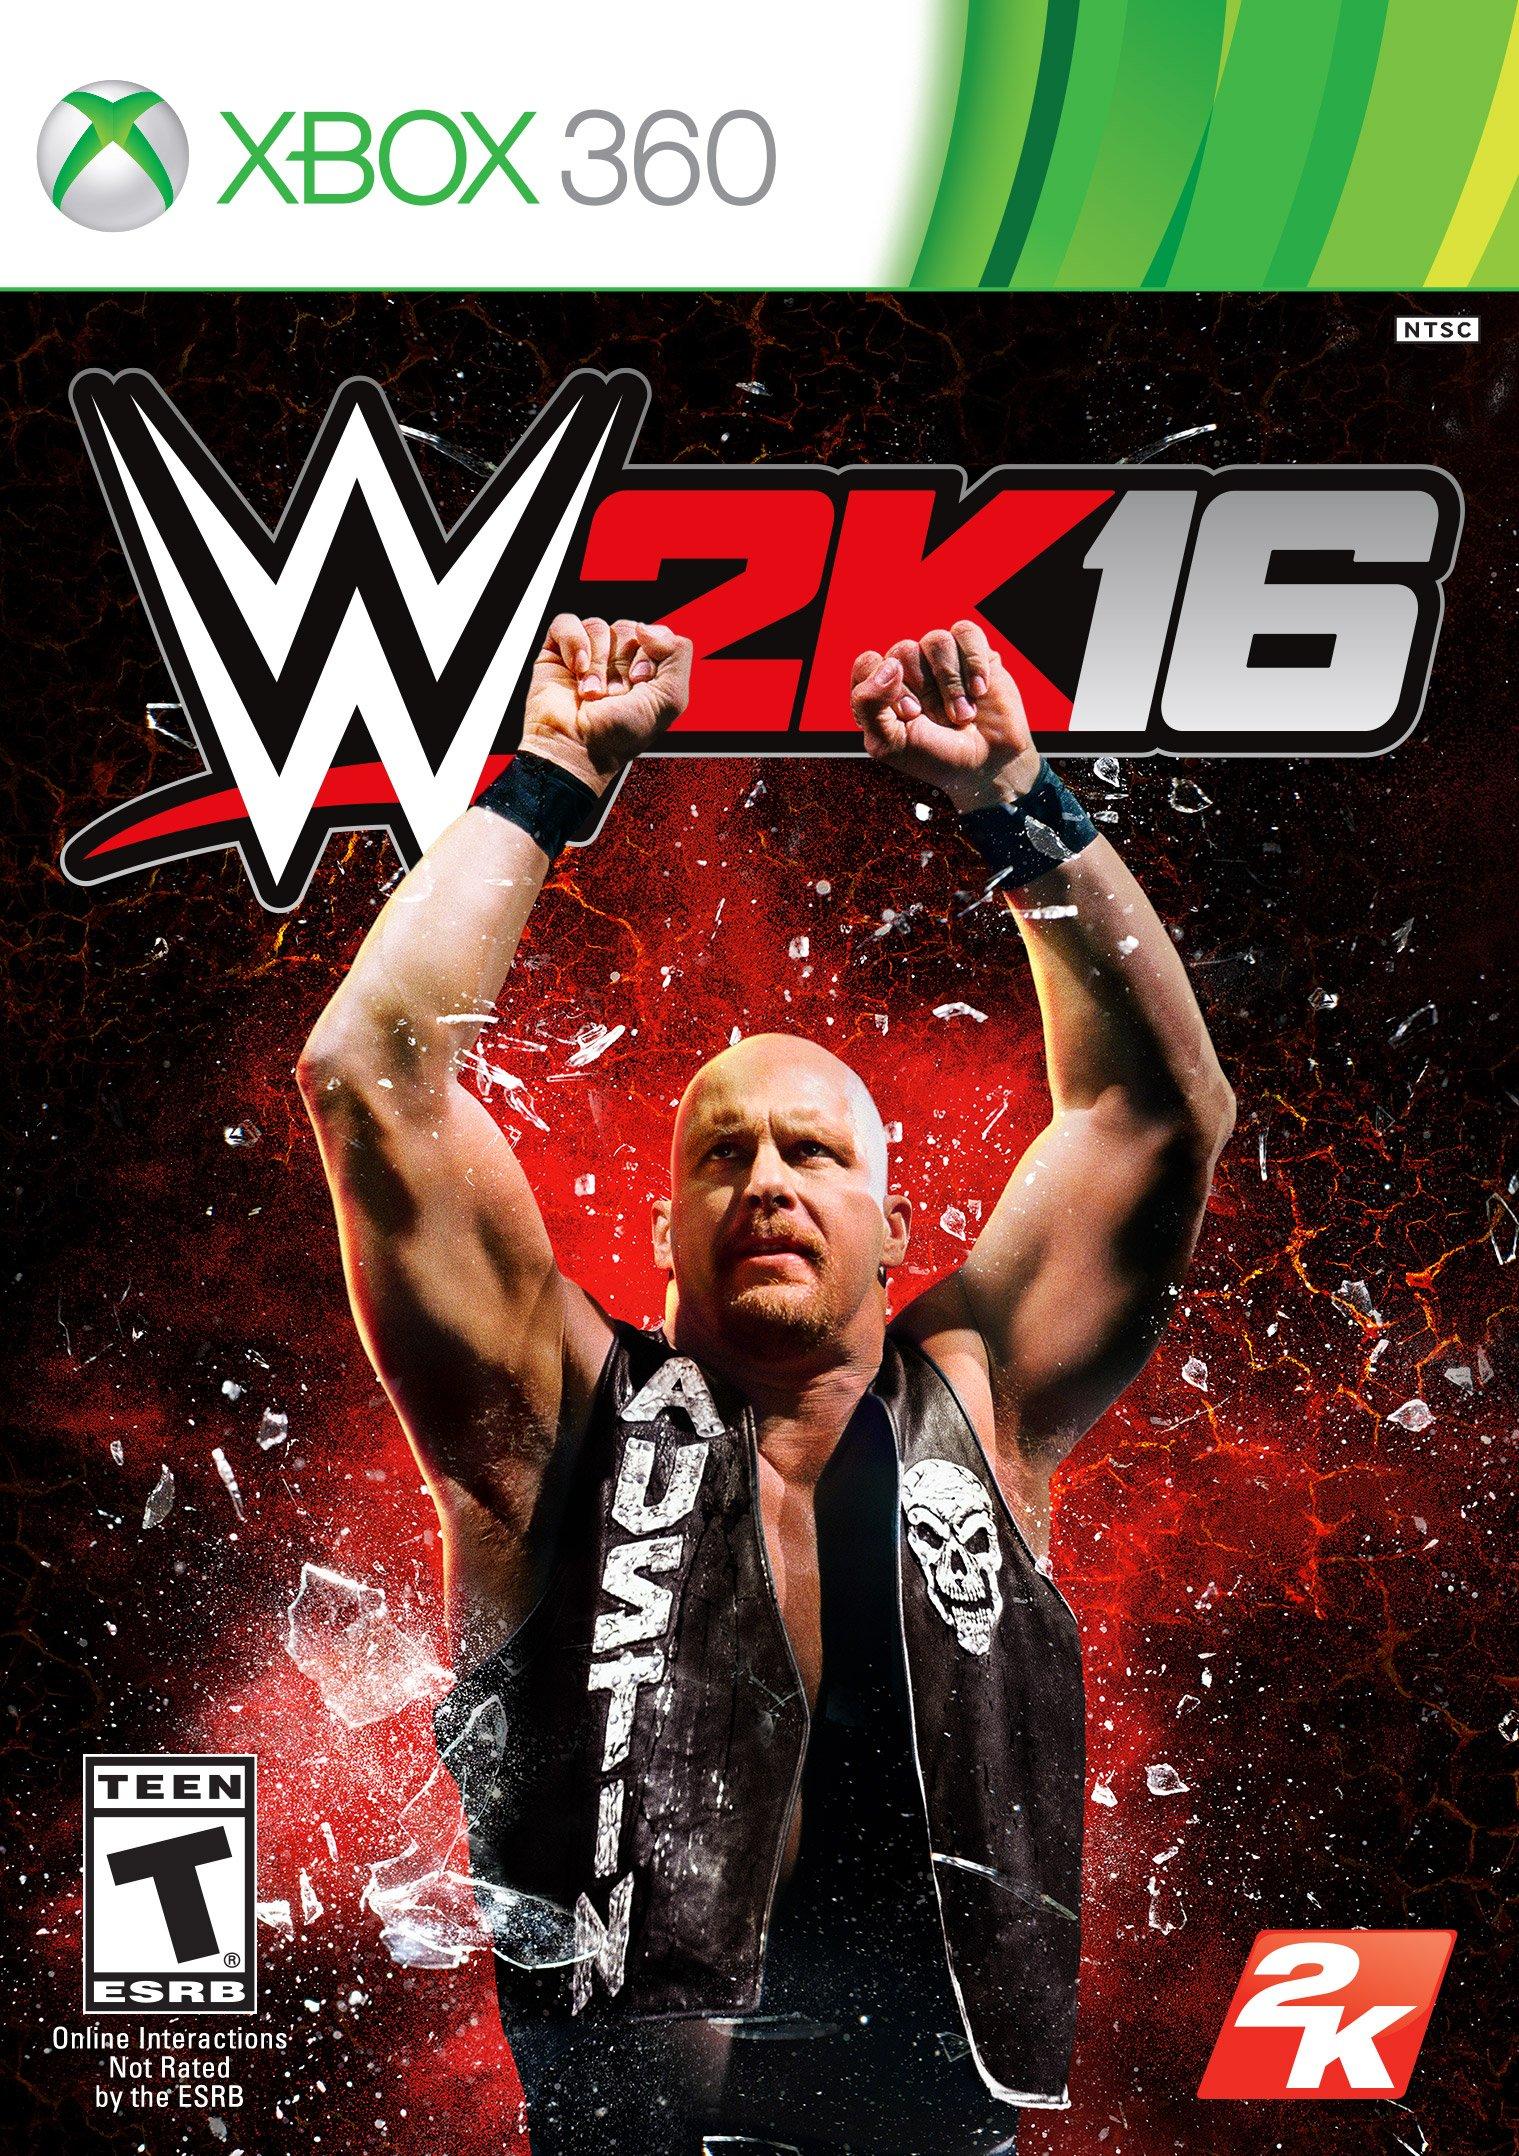 Wwe2k16 which move does more dmg play